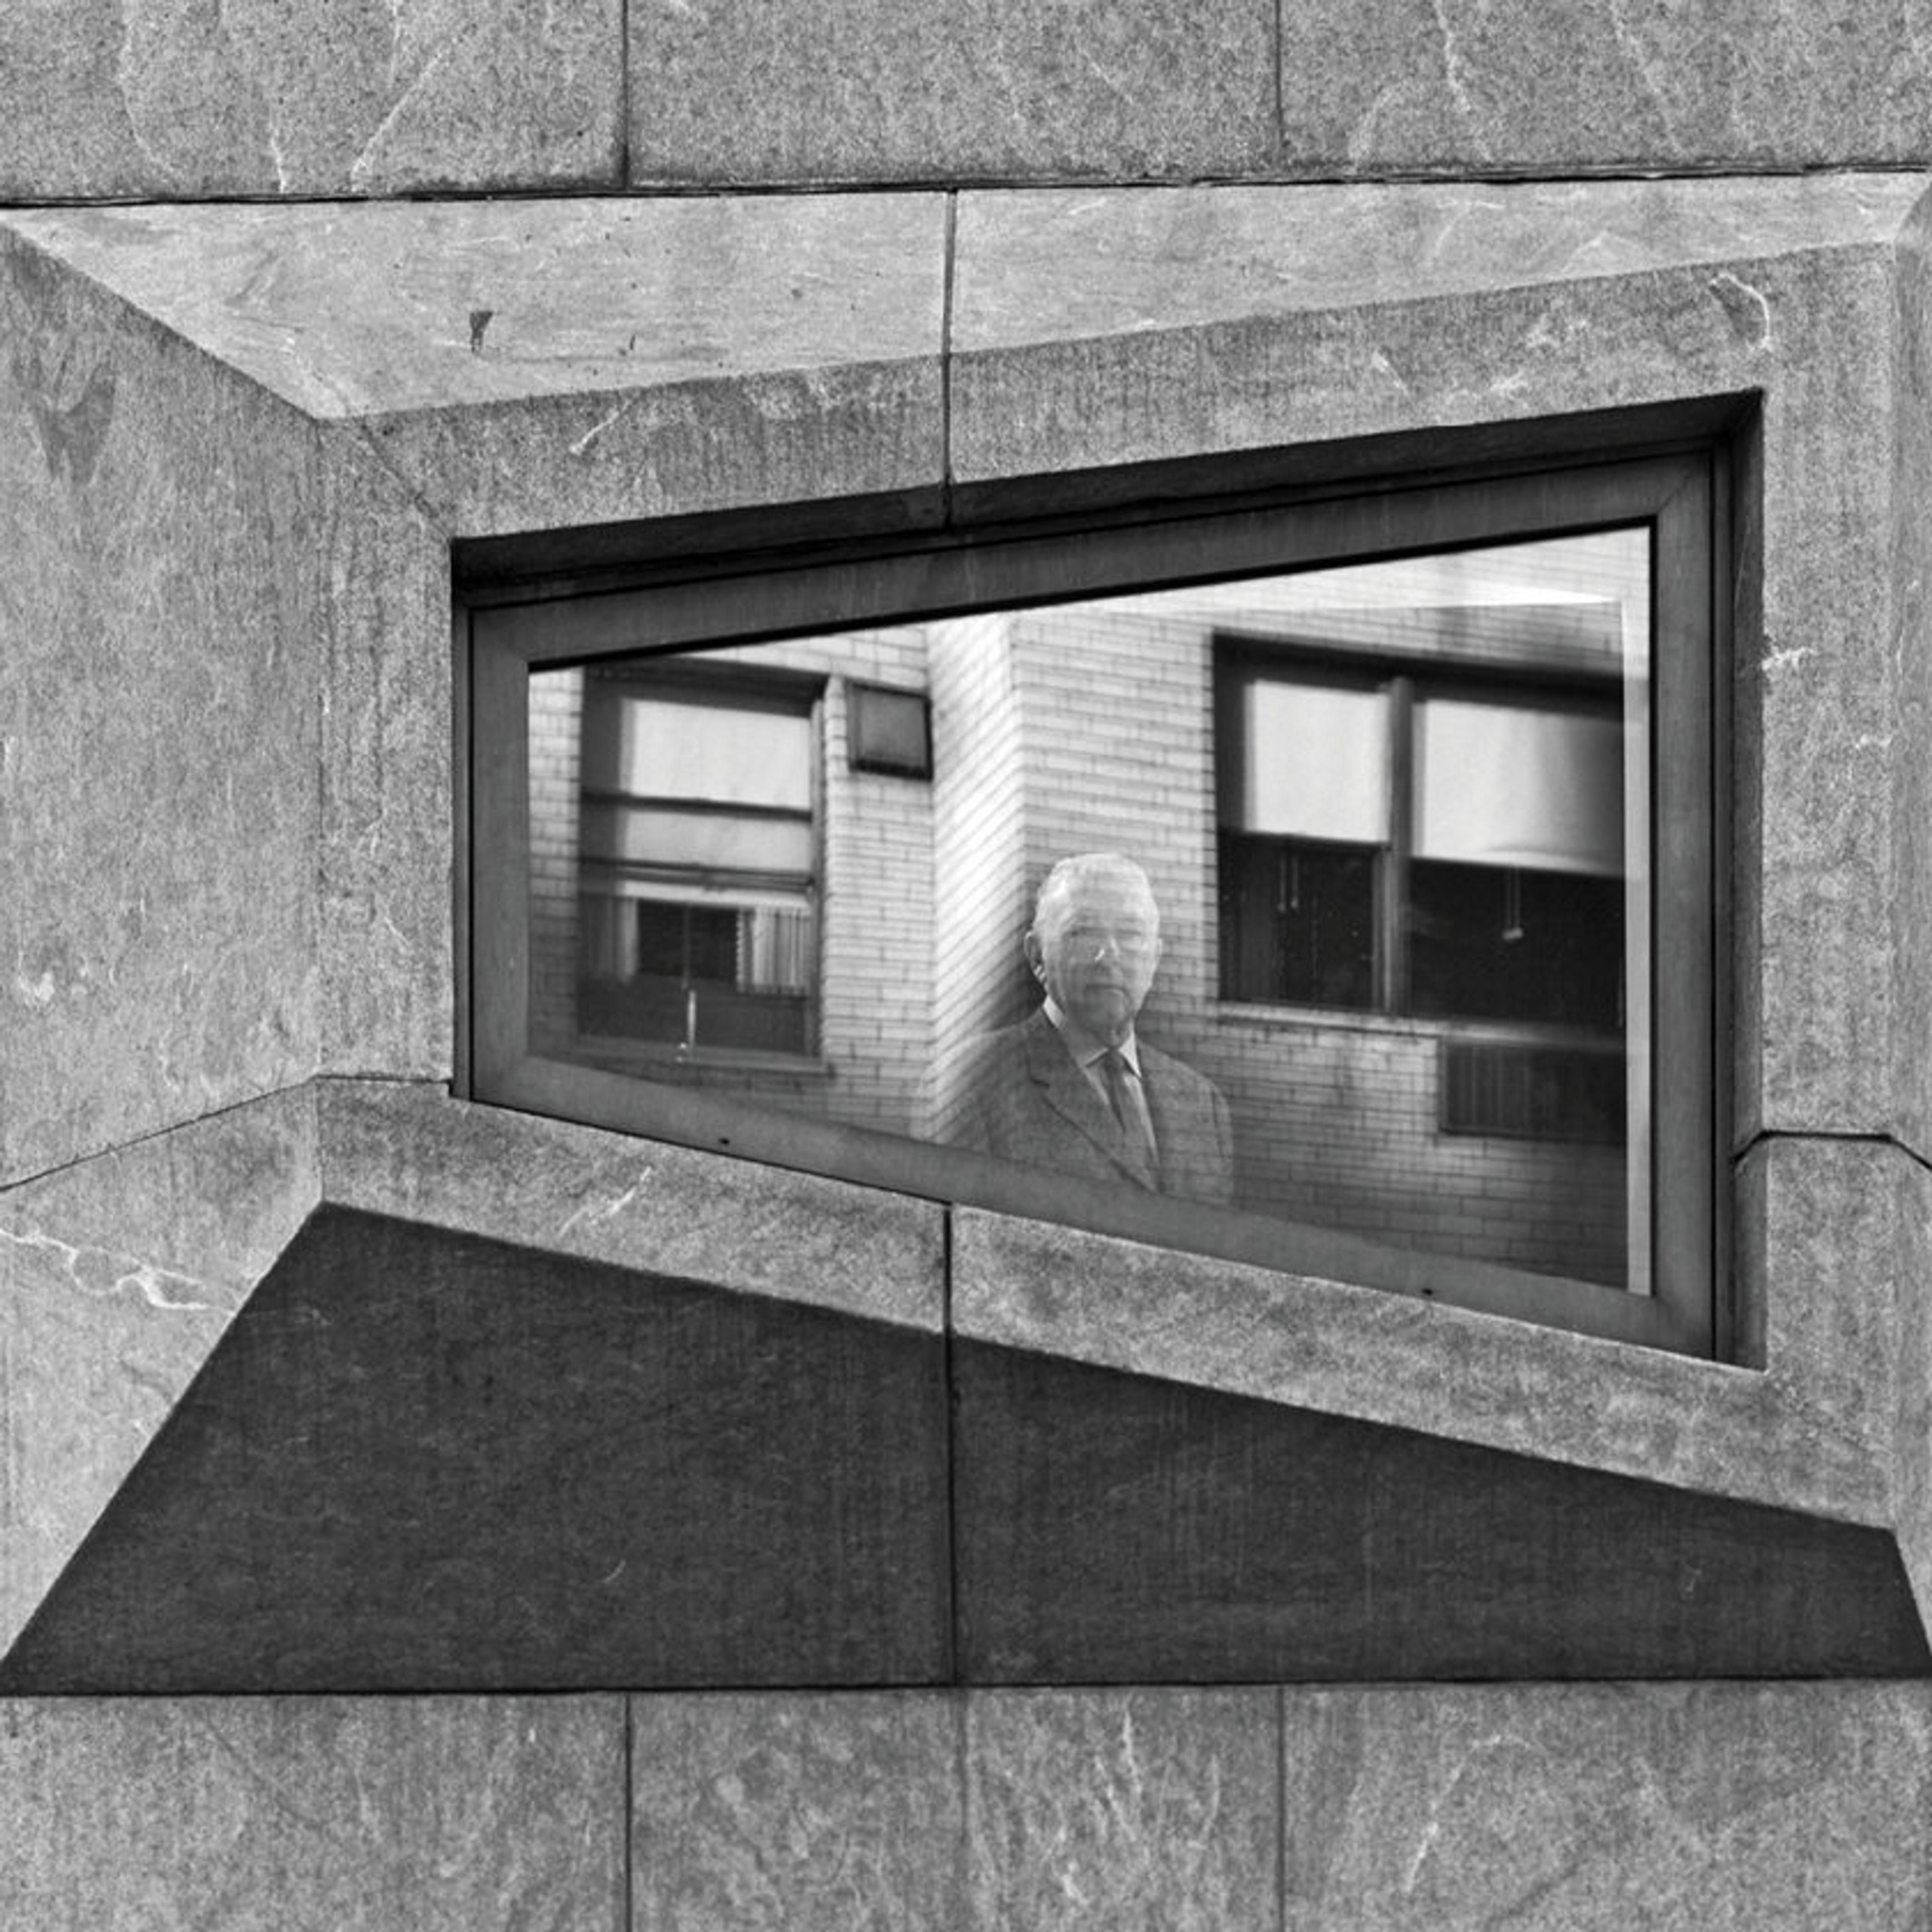 Black-and-white image of a window on Marcel Breuer's iconic building at Madison and 75th Street, with the architect himself visible in the window